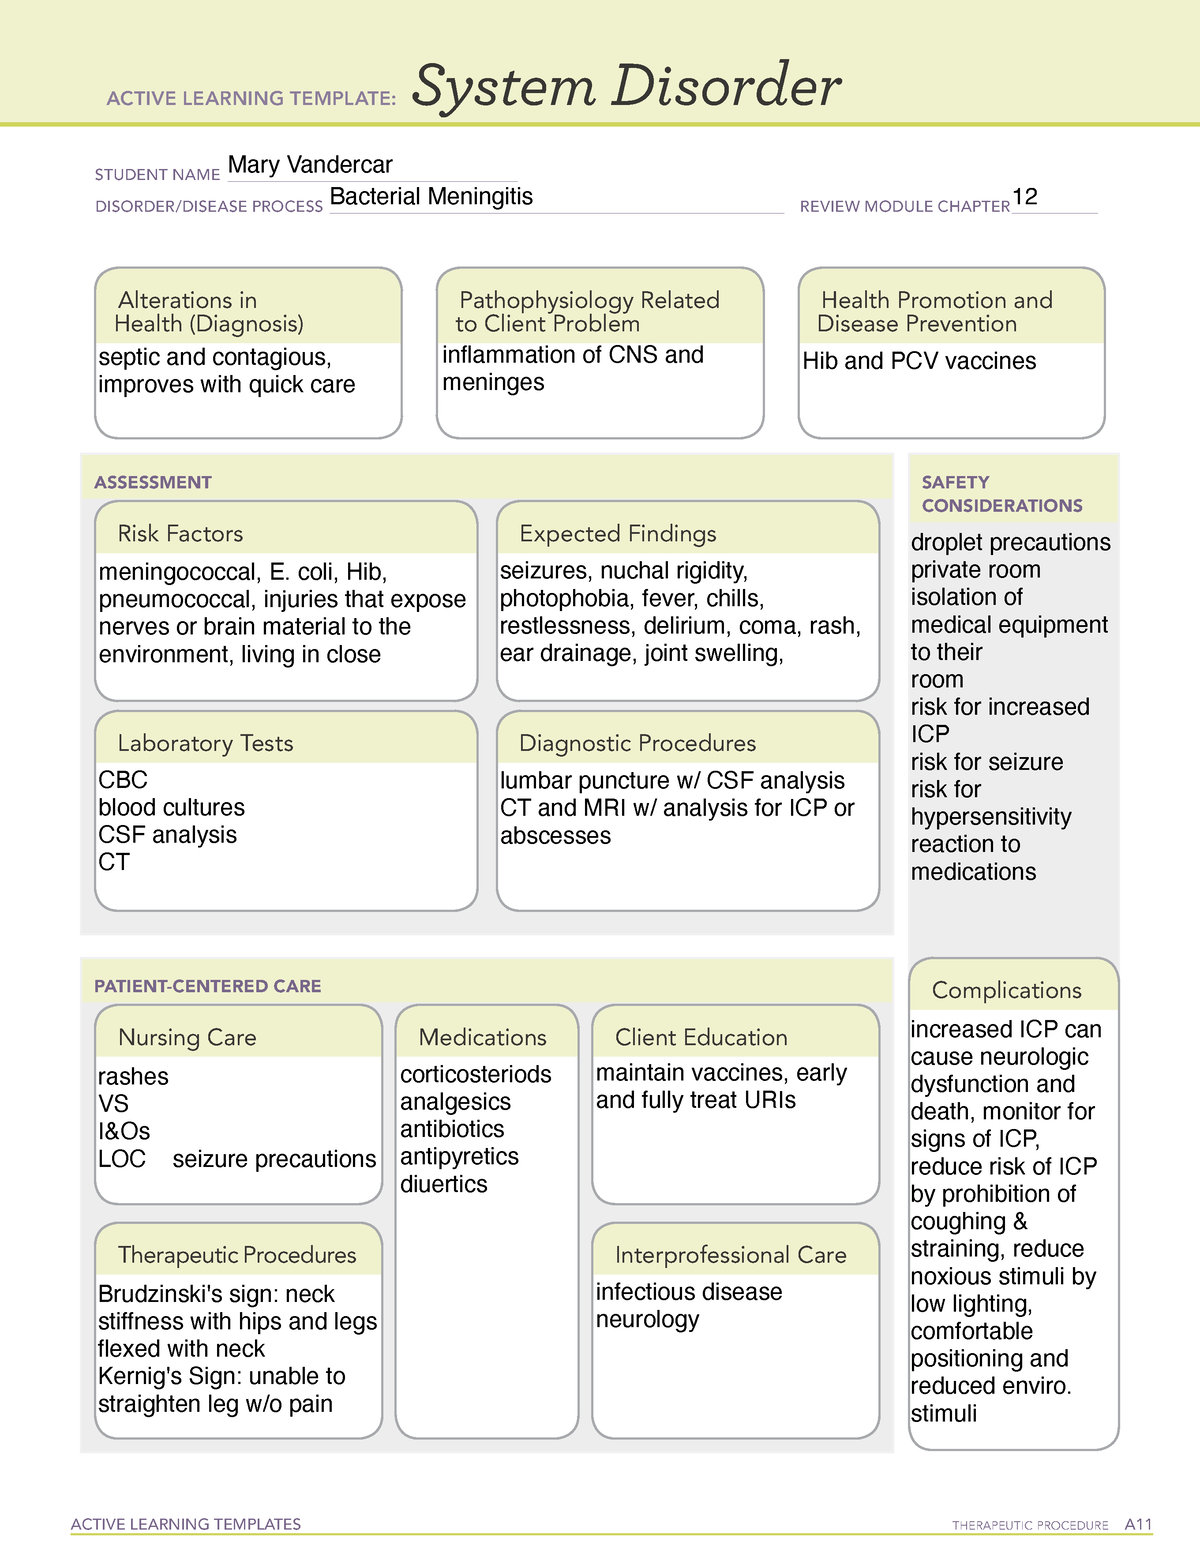 Bacterial Meningitis System Disorder ACTIVE LEARNING TEMPLATES